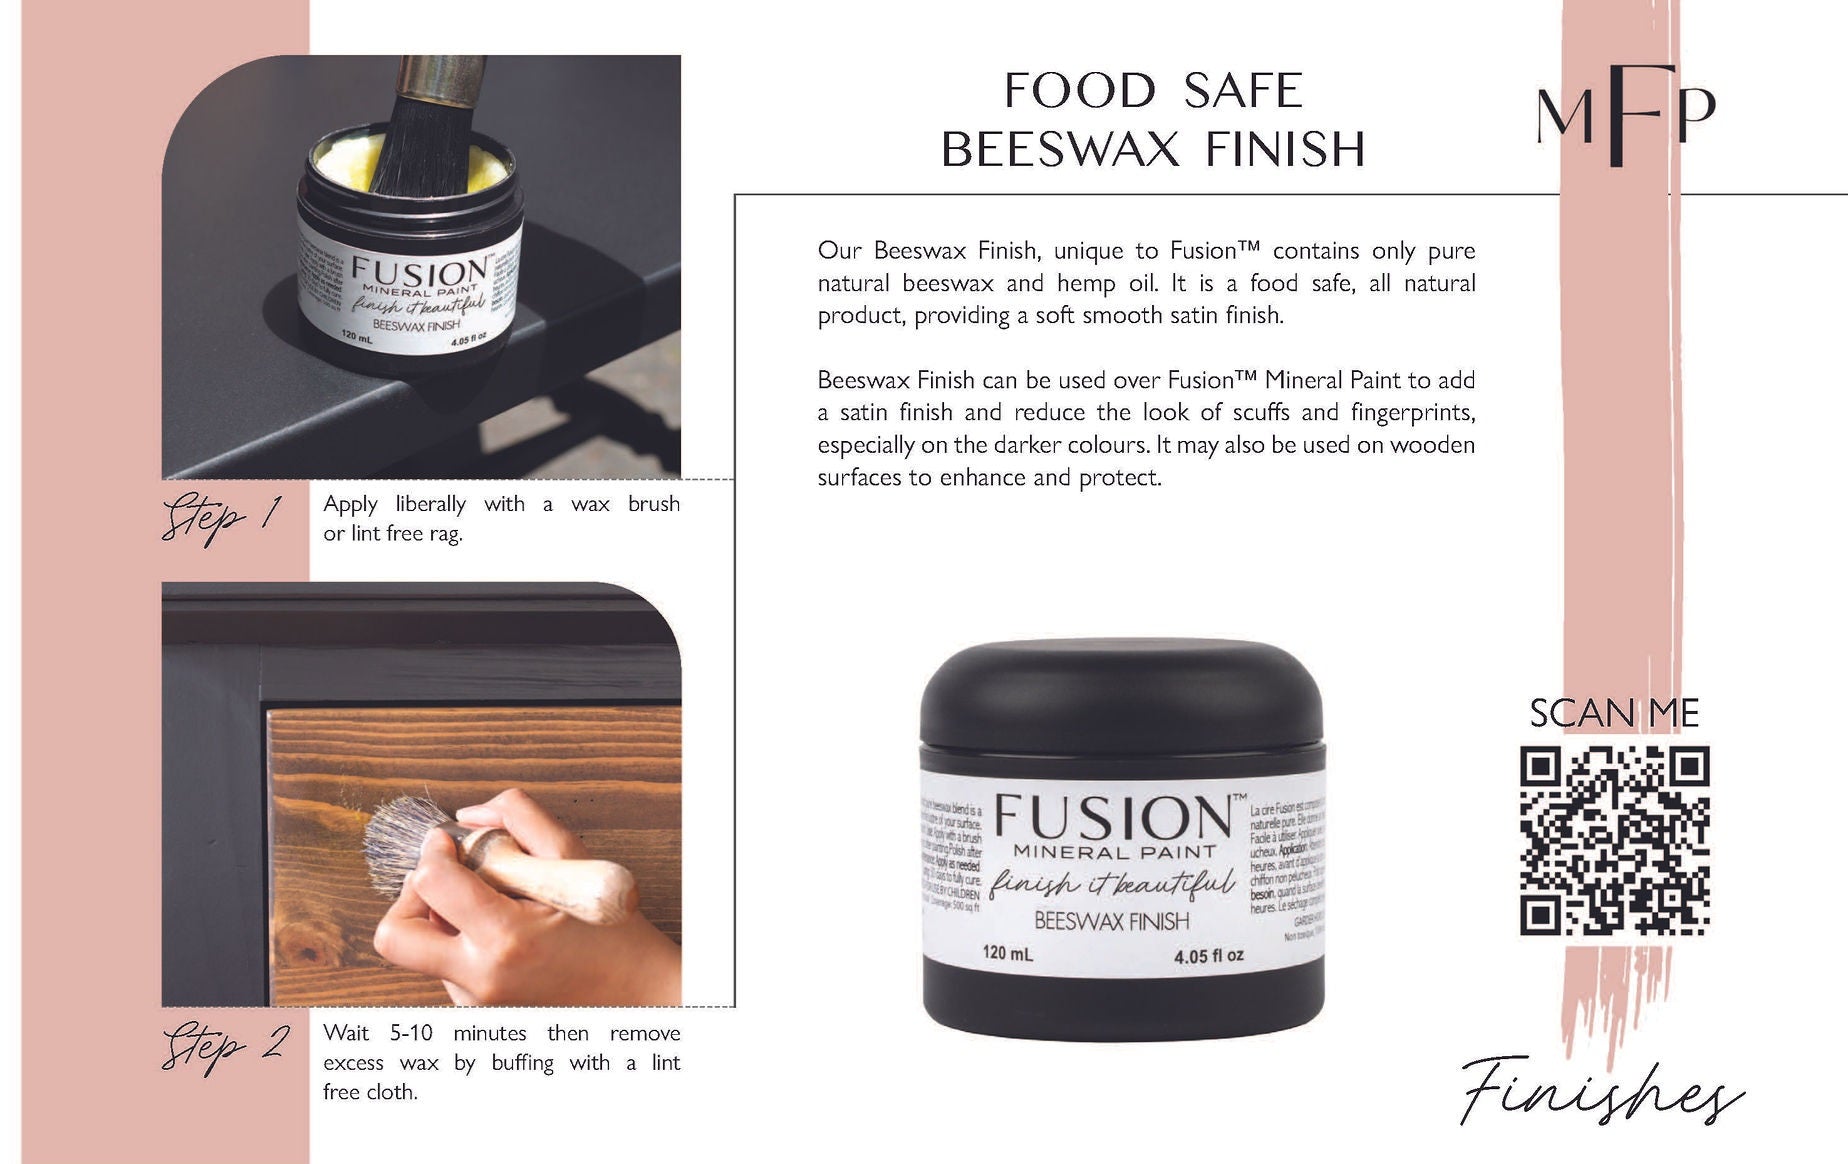 How to use Fusion foodsafe Beeswax finish